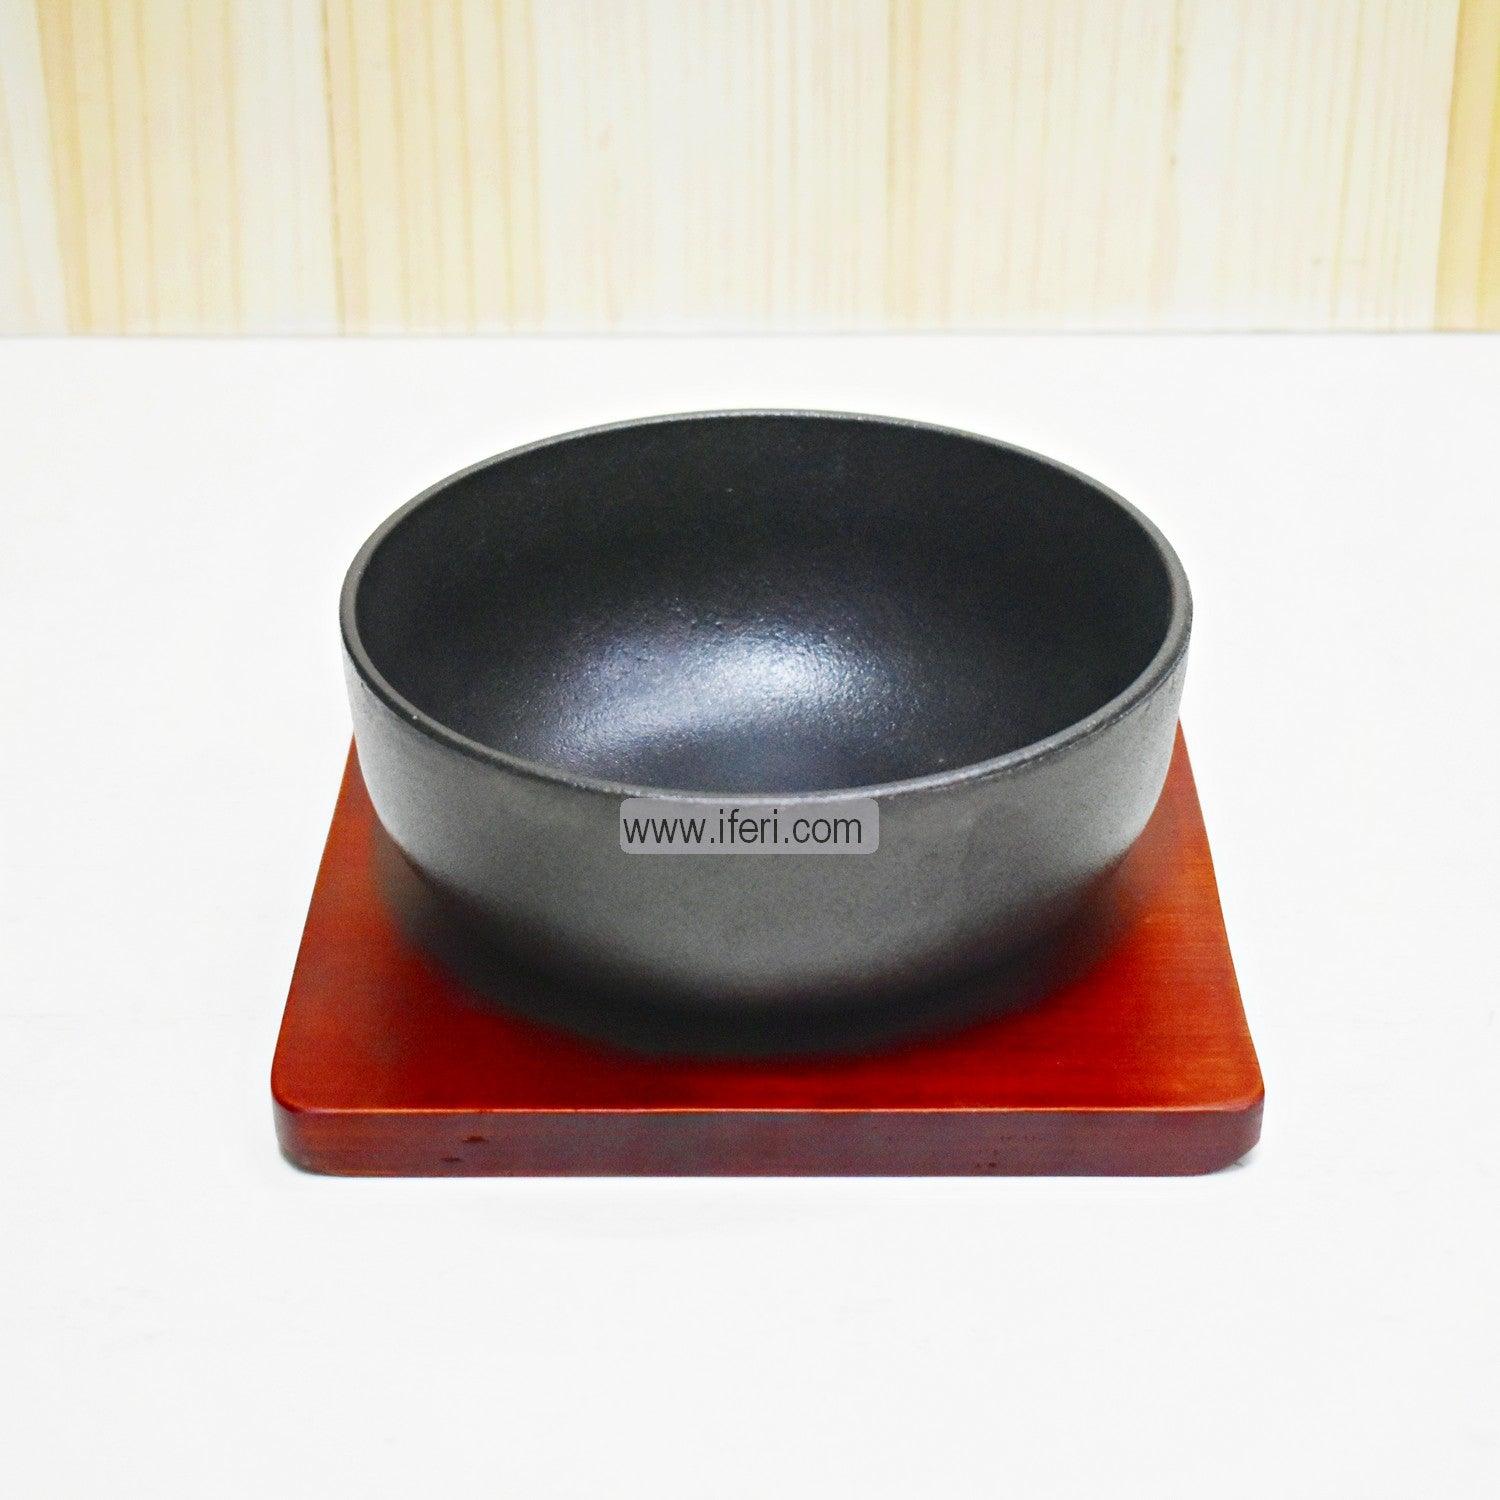 Thicken Stone Bowl Korean Stone Bowl for Induction Cooker with Wooden Tray RY0518 Price in Bangladesh - iferi.com